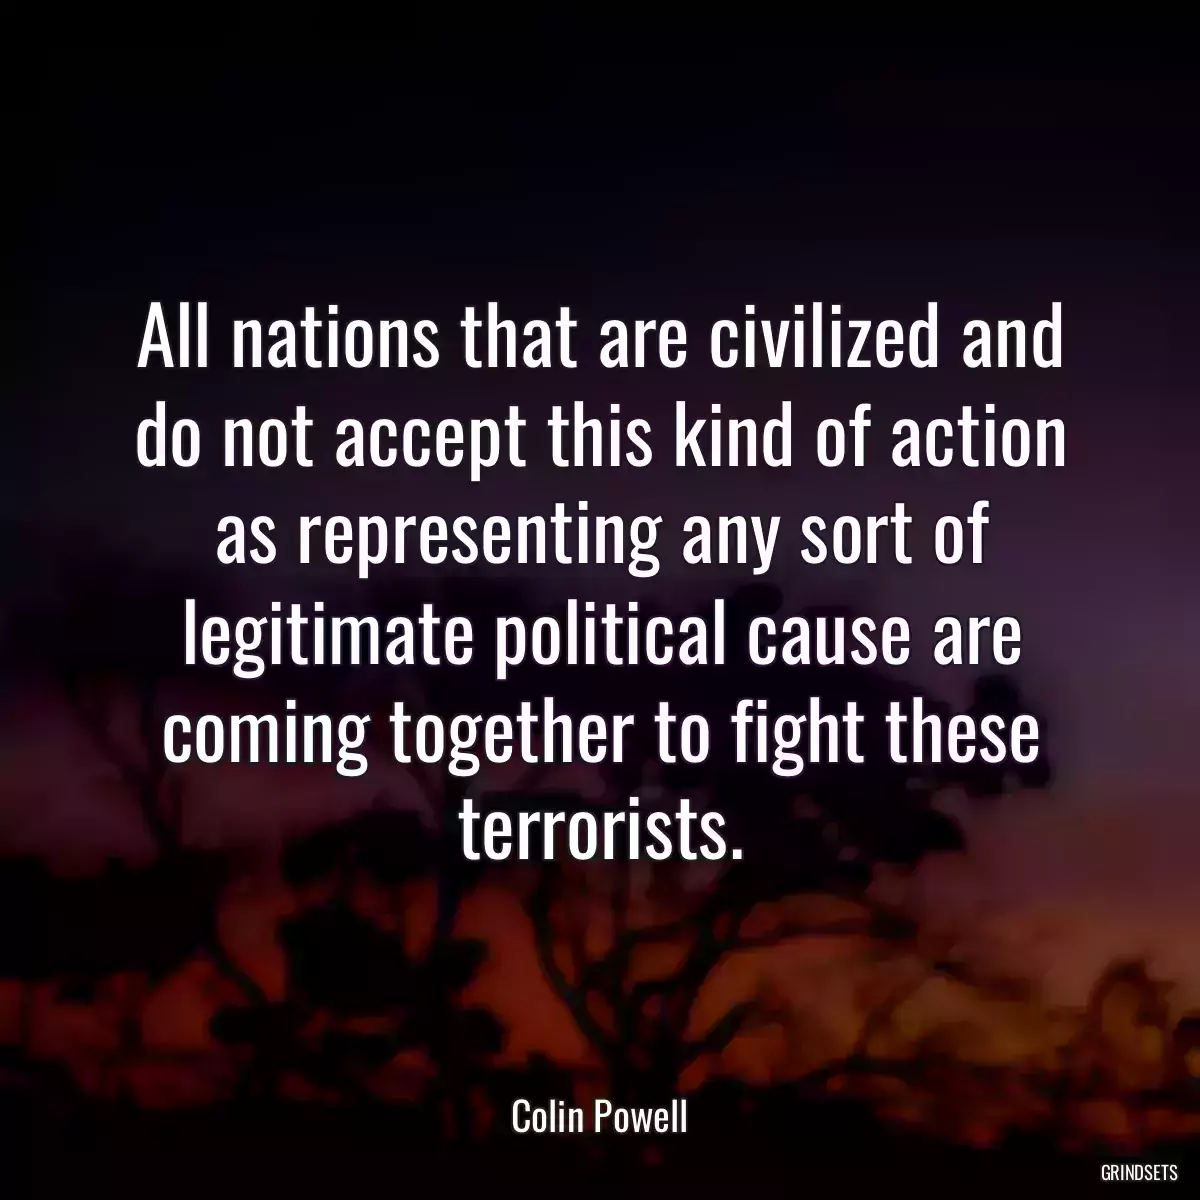 All nations that are civilized and do not accept this kind of action as representing any sort of legitimate political cause are coming together to fight these terrorists.